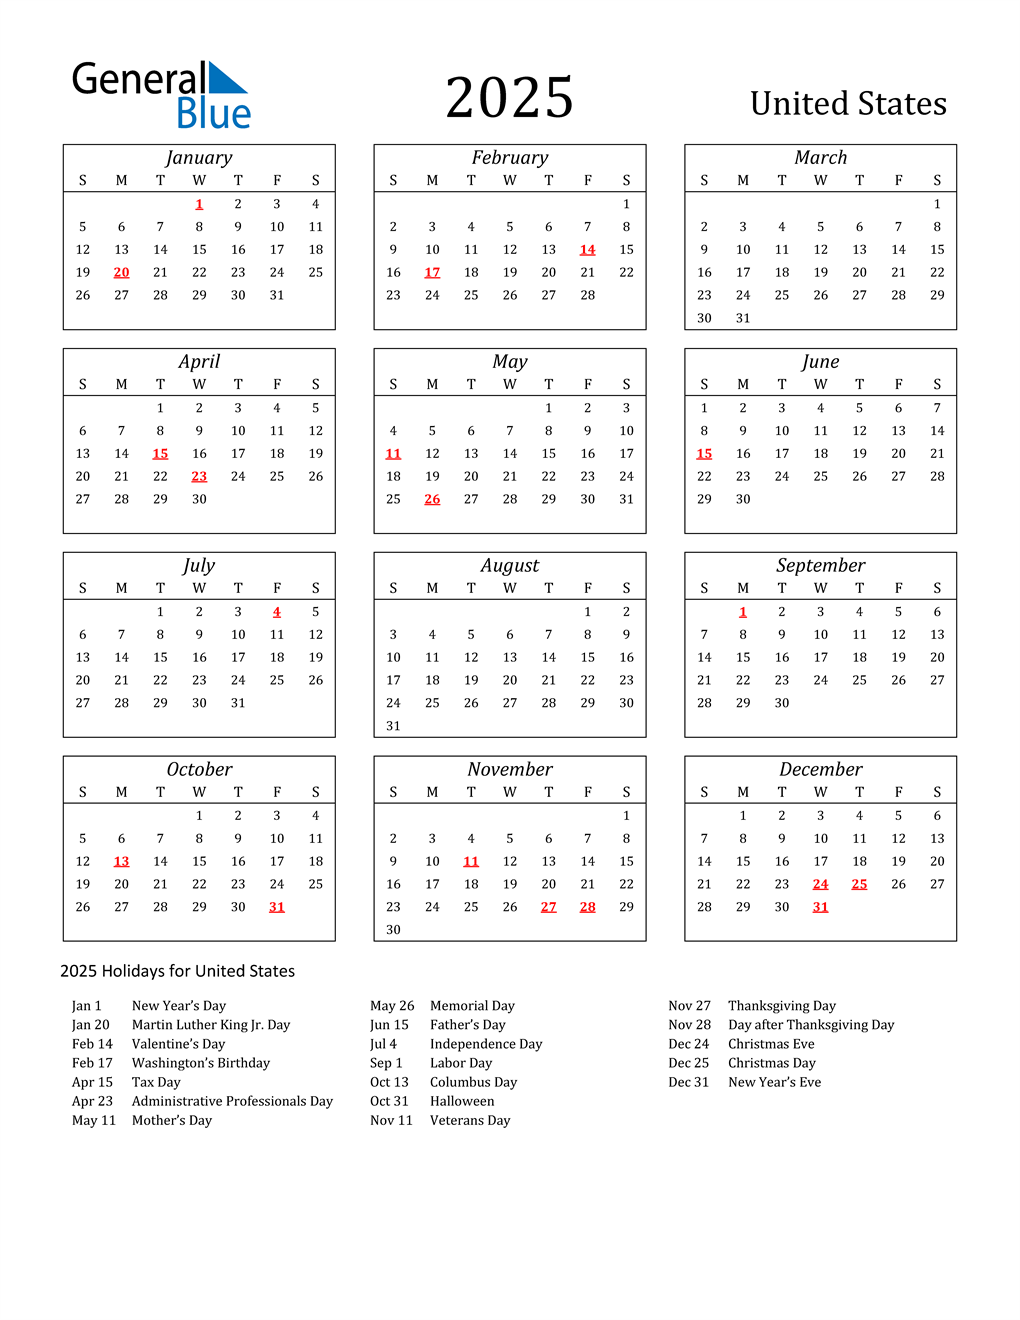 standard-holiday-calendar-for-2025-with-united-states-holidays